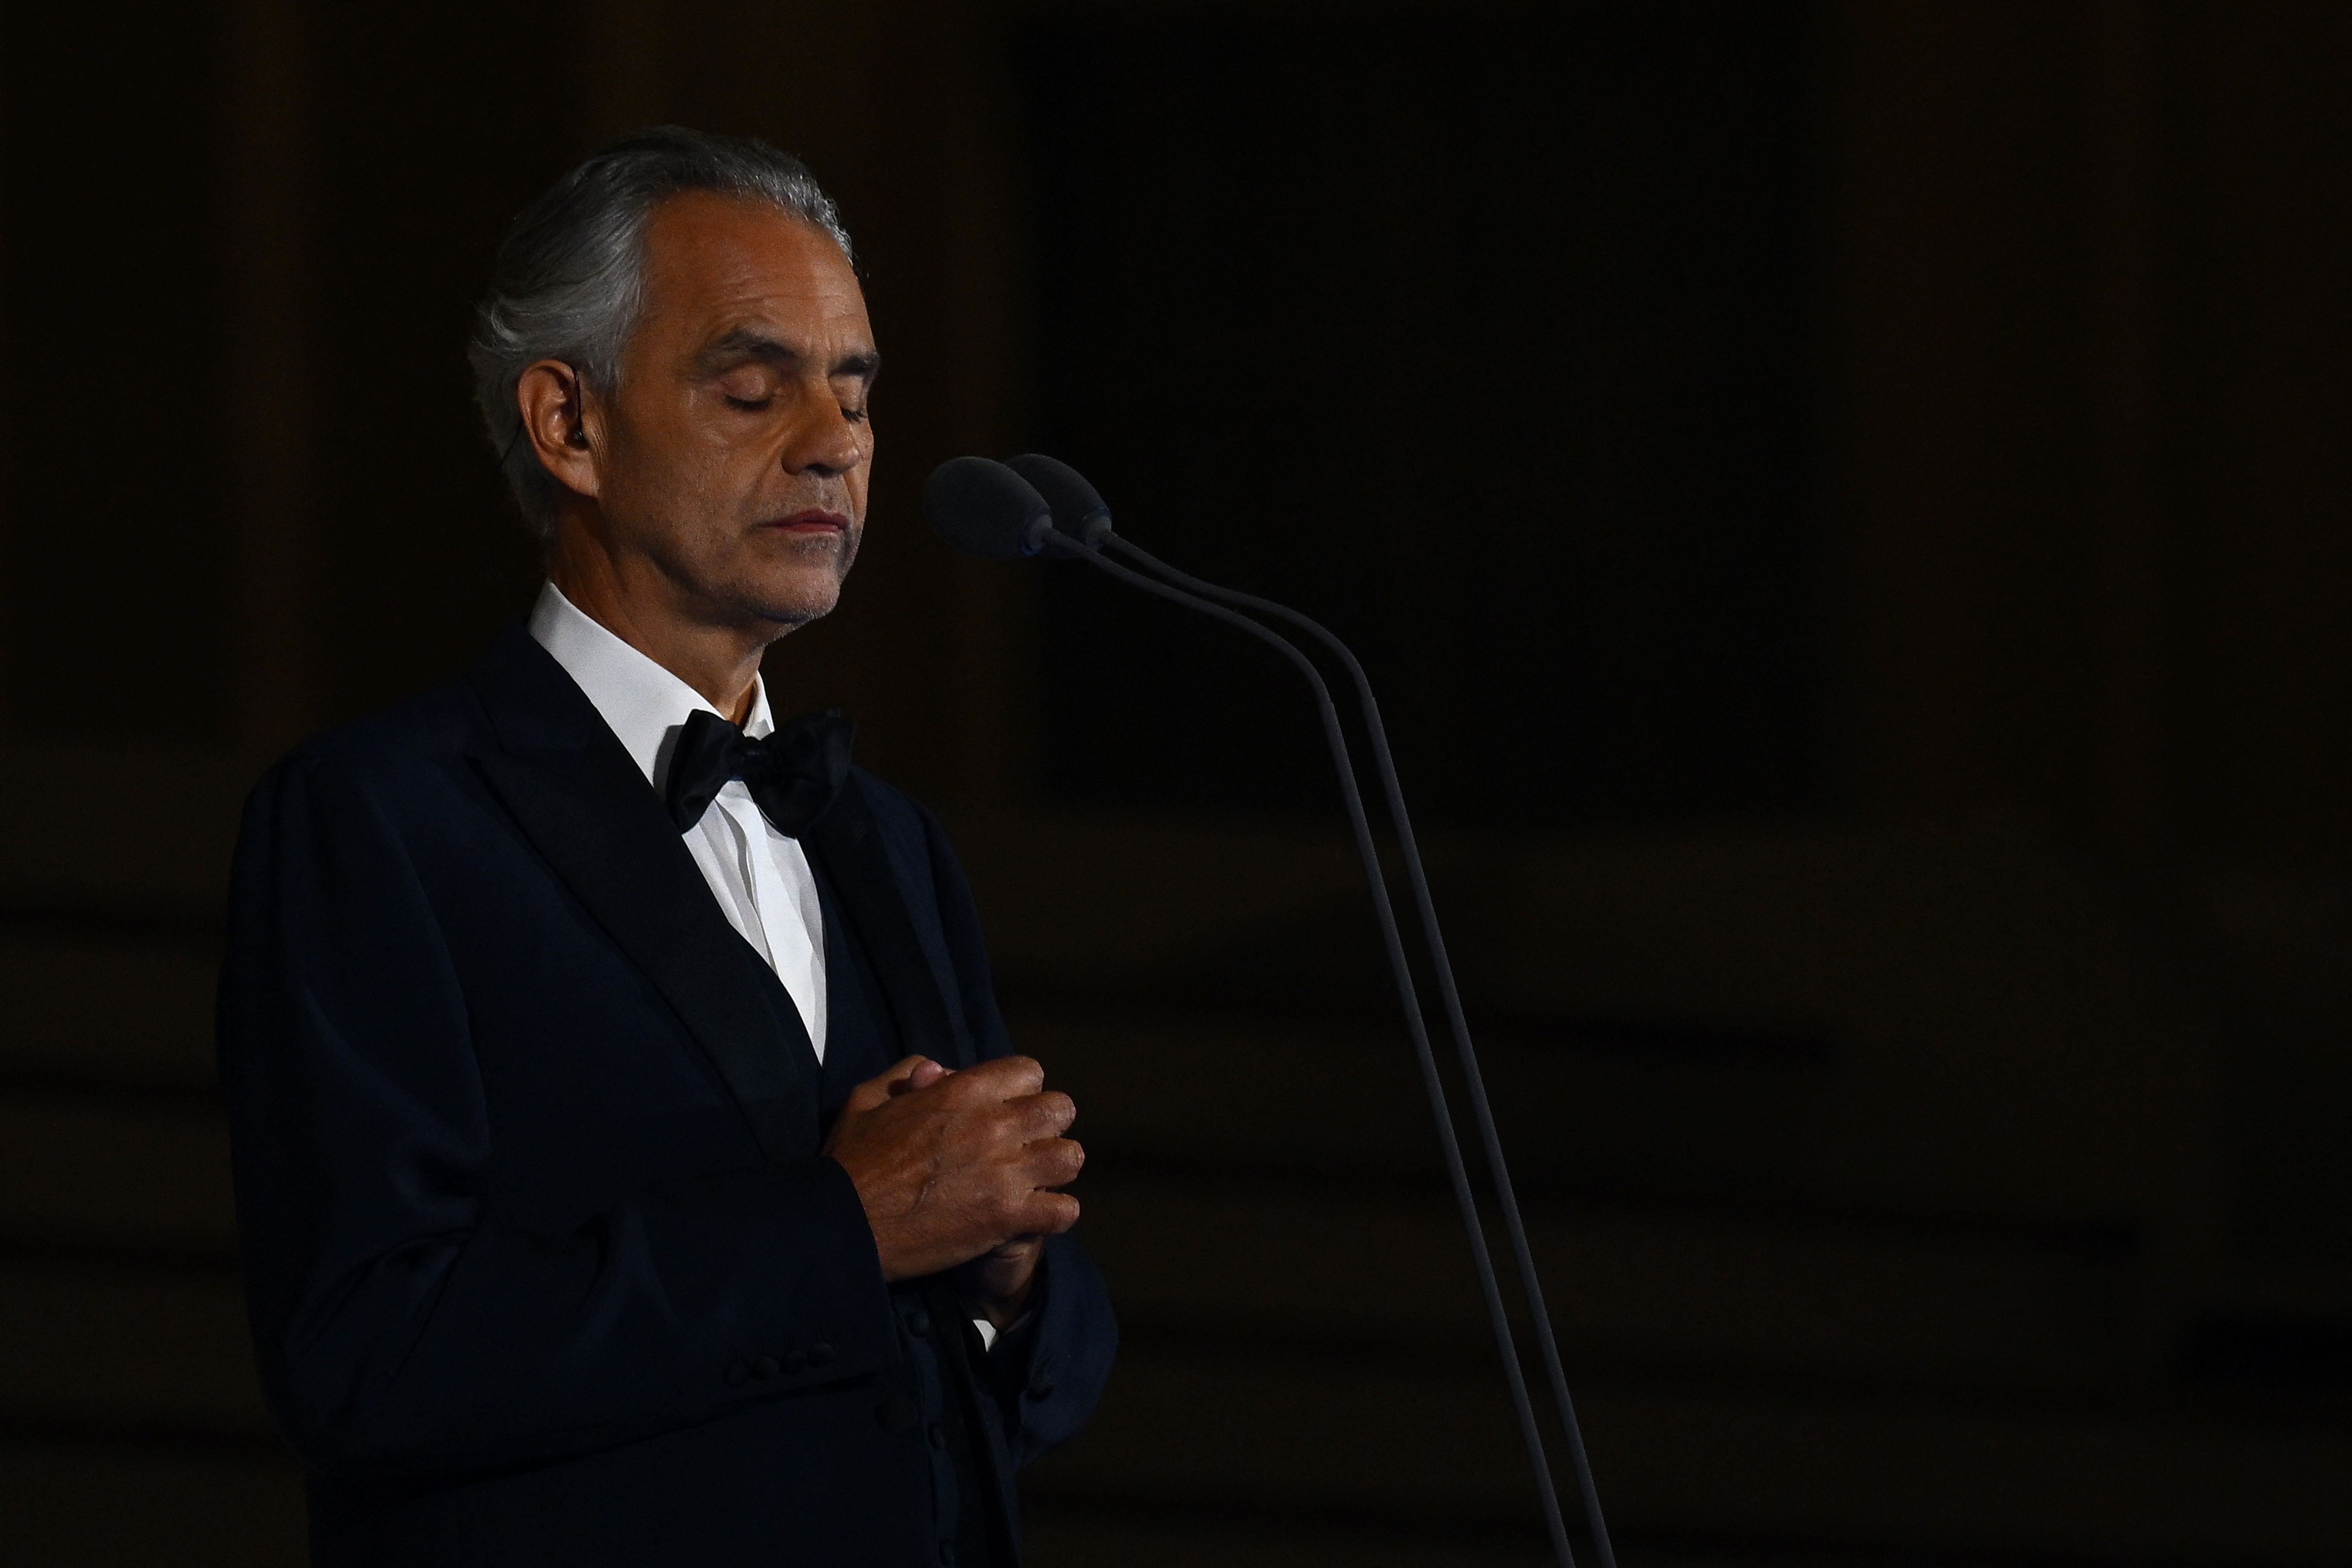 Andrea Bocelli on singing and his new daughter